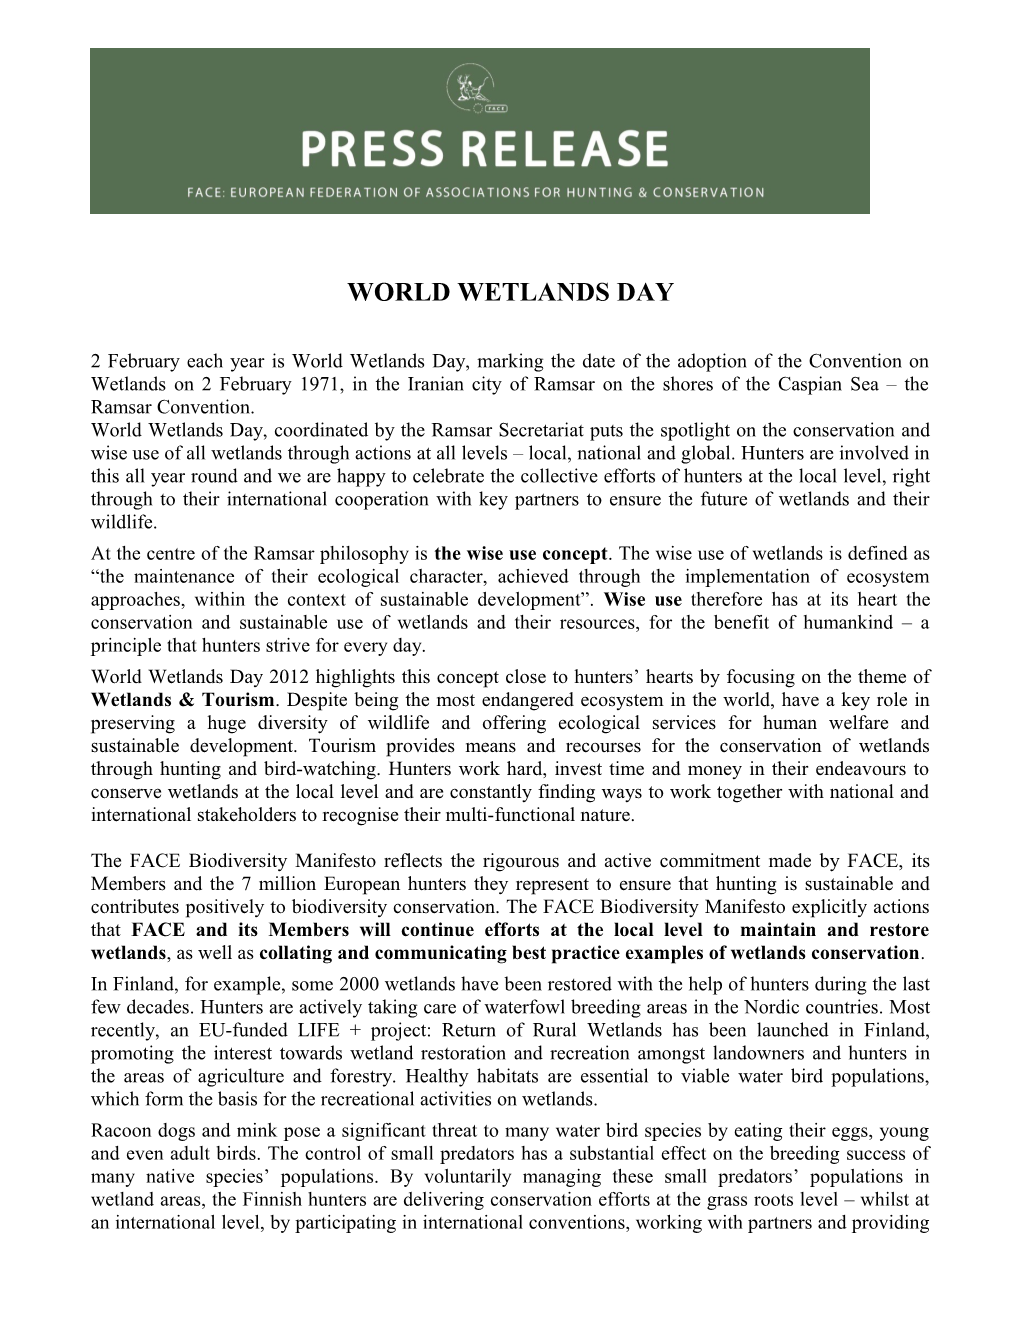 Face Press Release : World Wetlands Day; 02.02.12